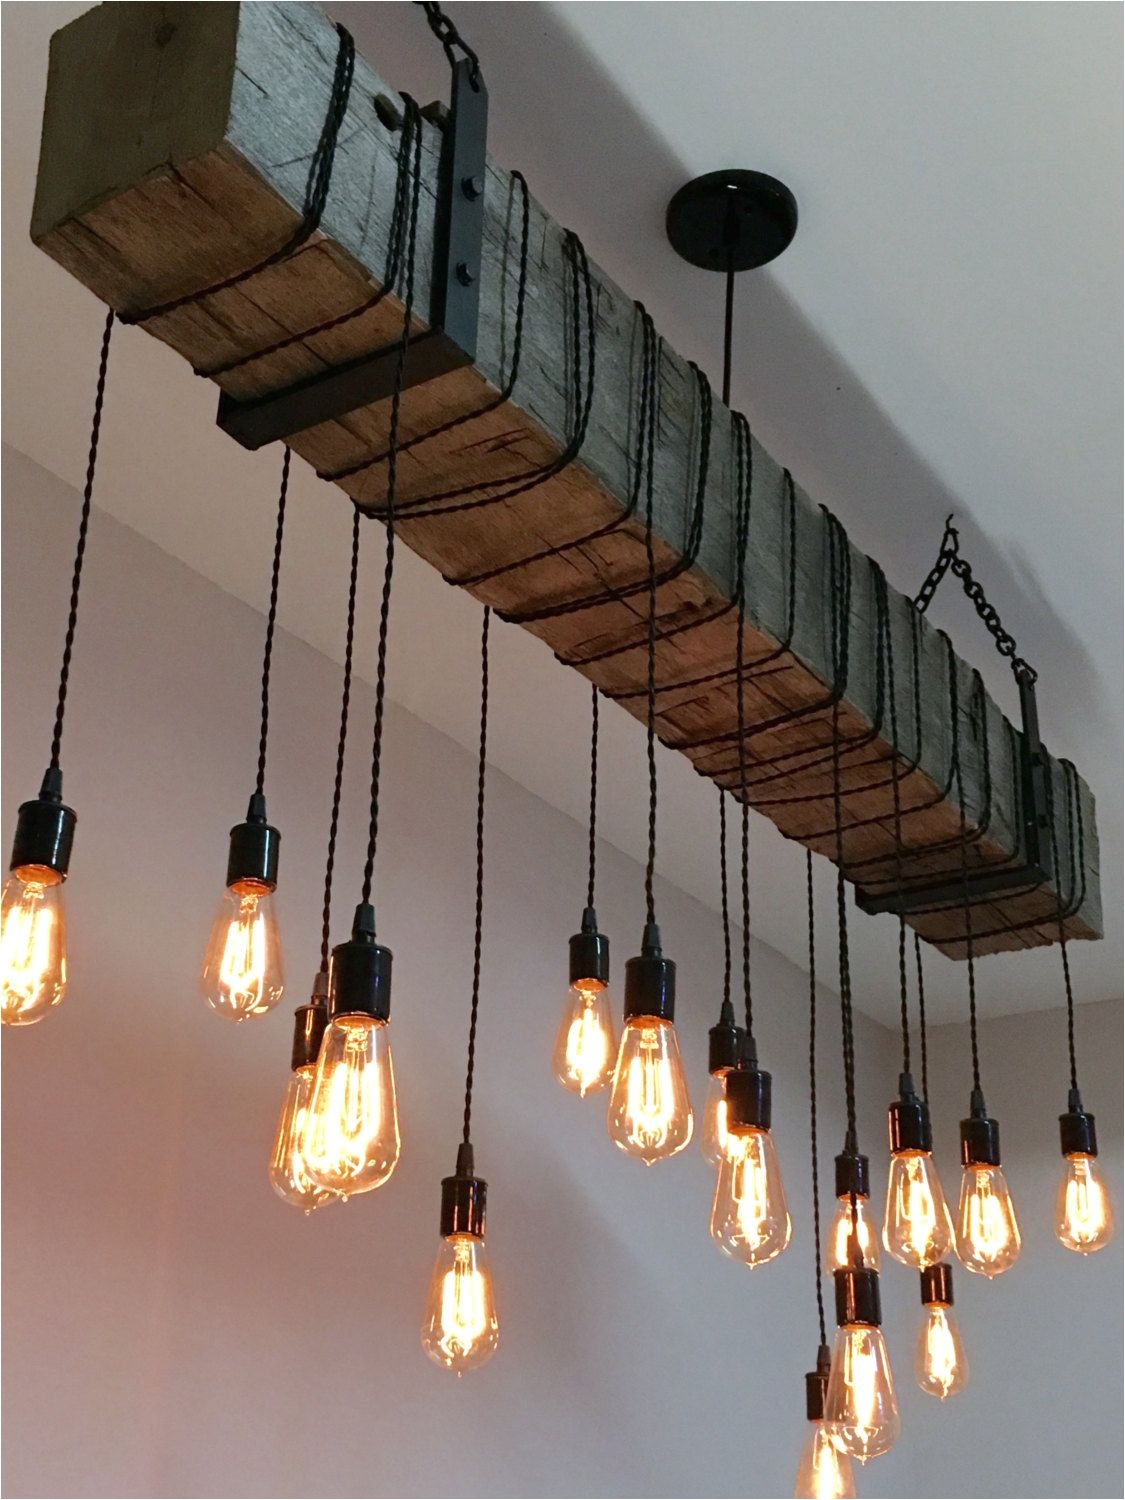 reclaimed hand hewn barn beam light fixture with wrapped lights and black metal hanging brackets we will customize the length of wire and black chain to